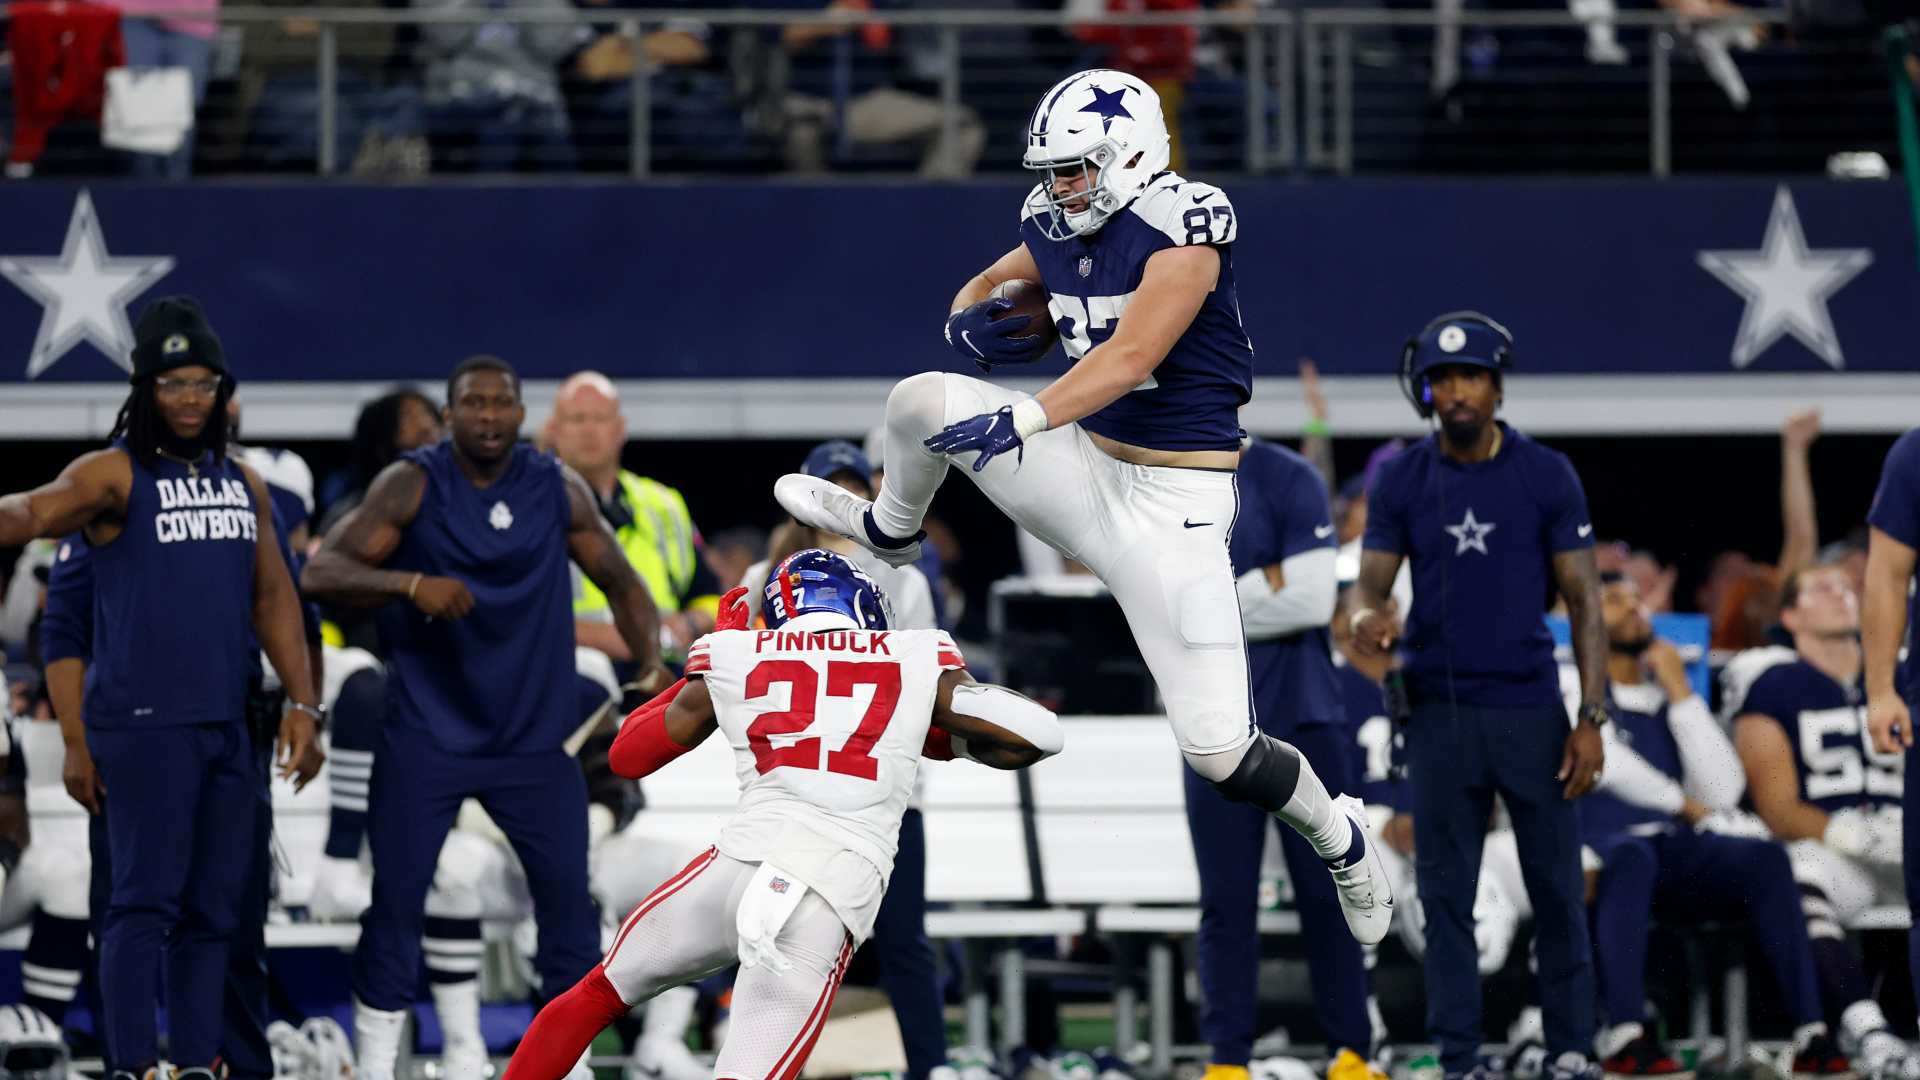 Cowboys-Giants Thanksgiving game averages record 42 million viewers